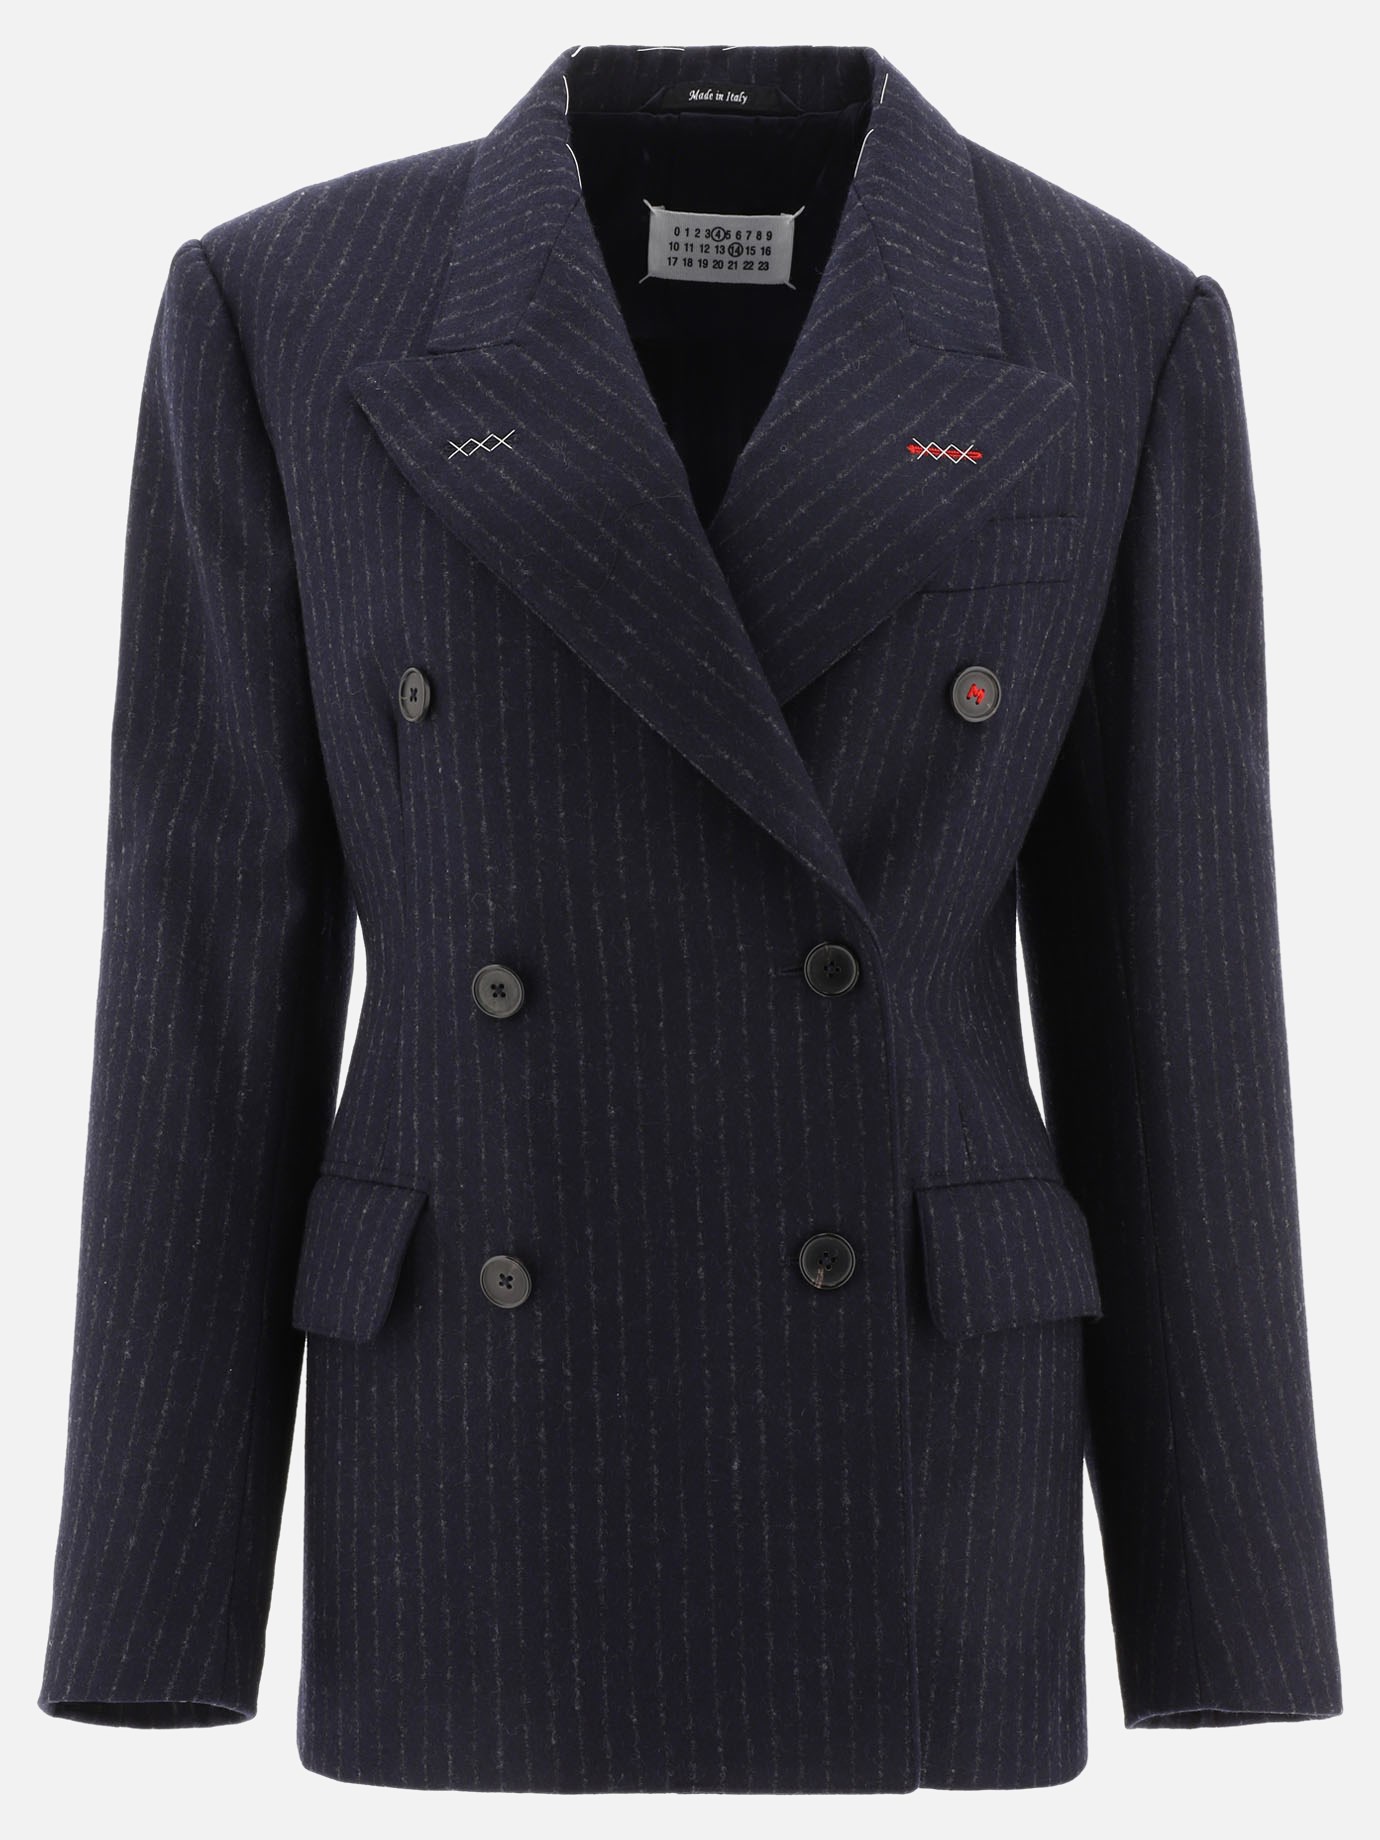 Pinstriped double-breasted blazer